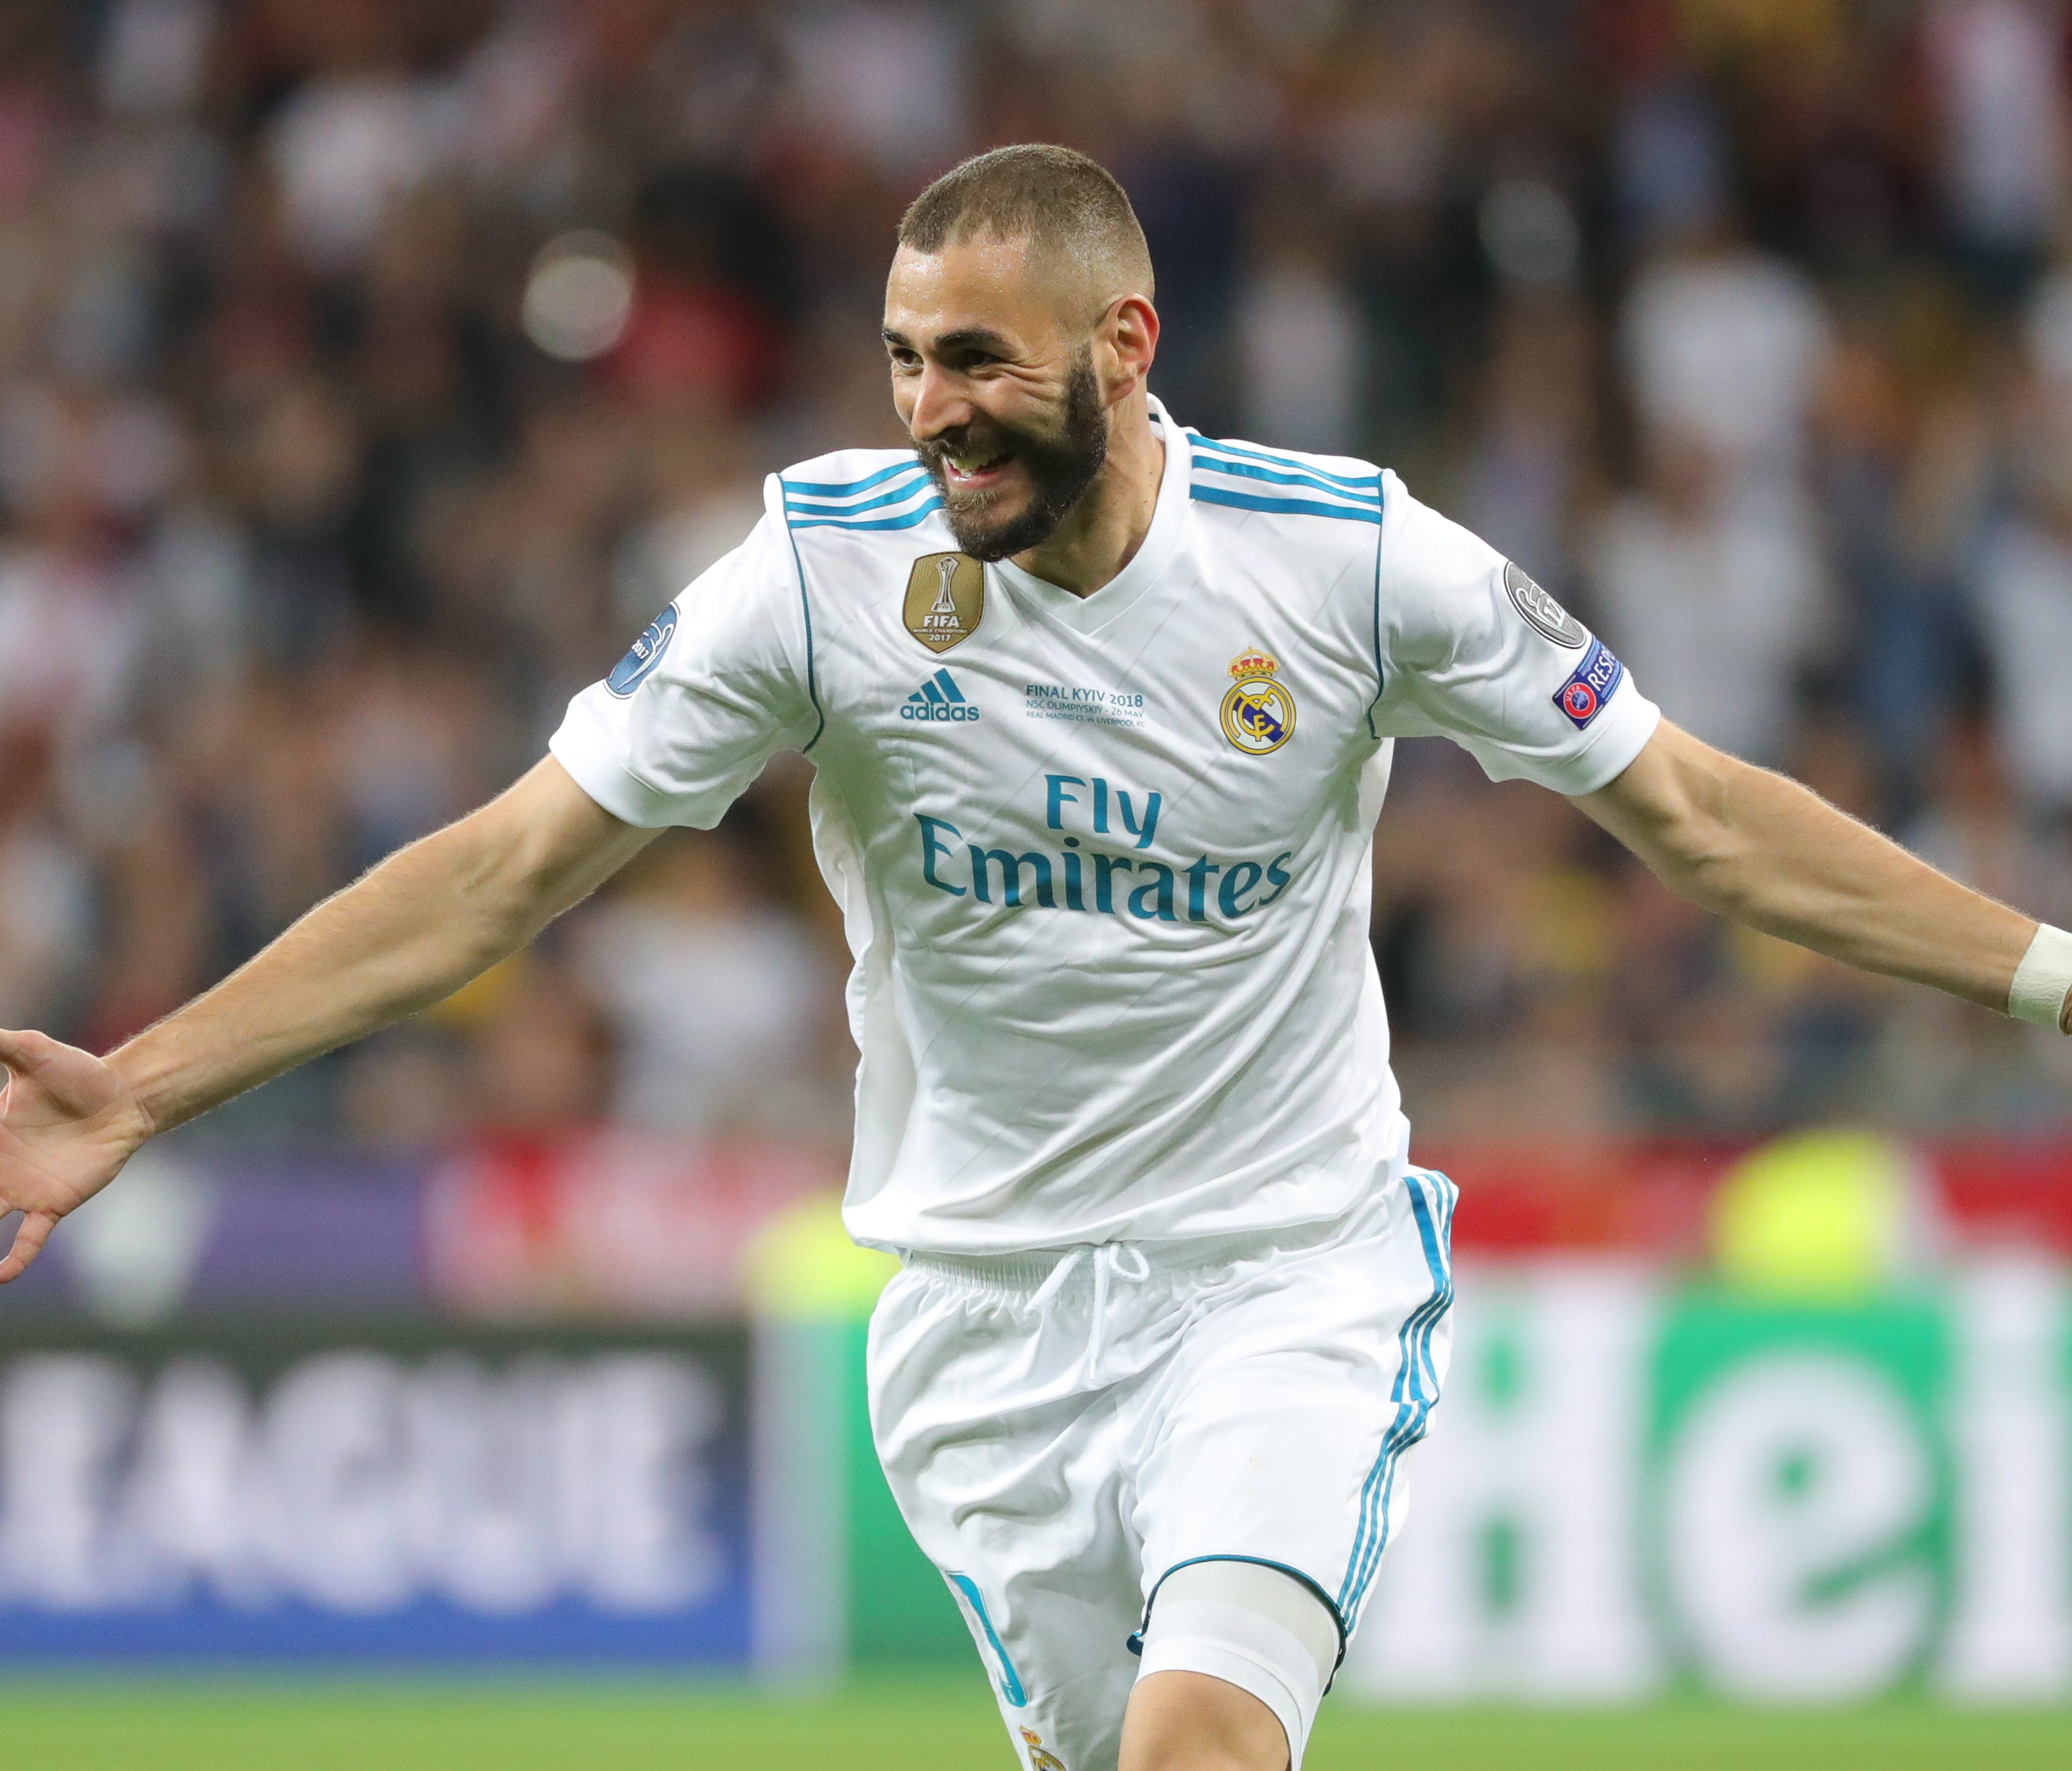 Real Madrid's Karim Benzema celebrates after scoring during the UEFA Champions League final between Real Madrid and Liverpool FC.